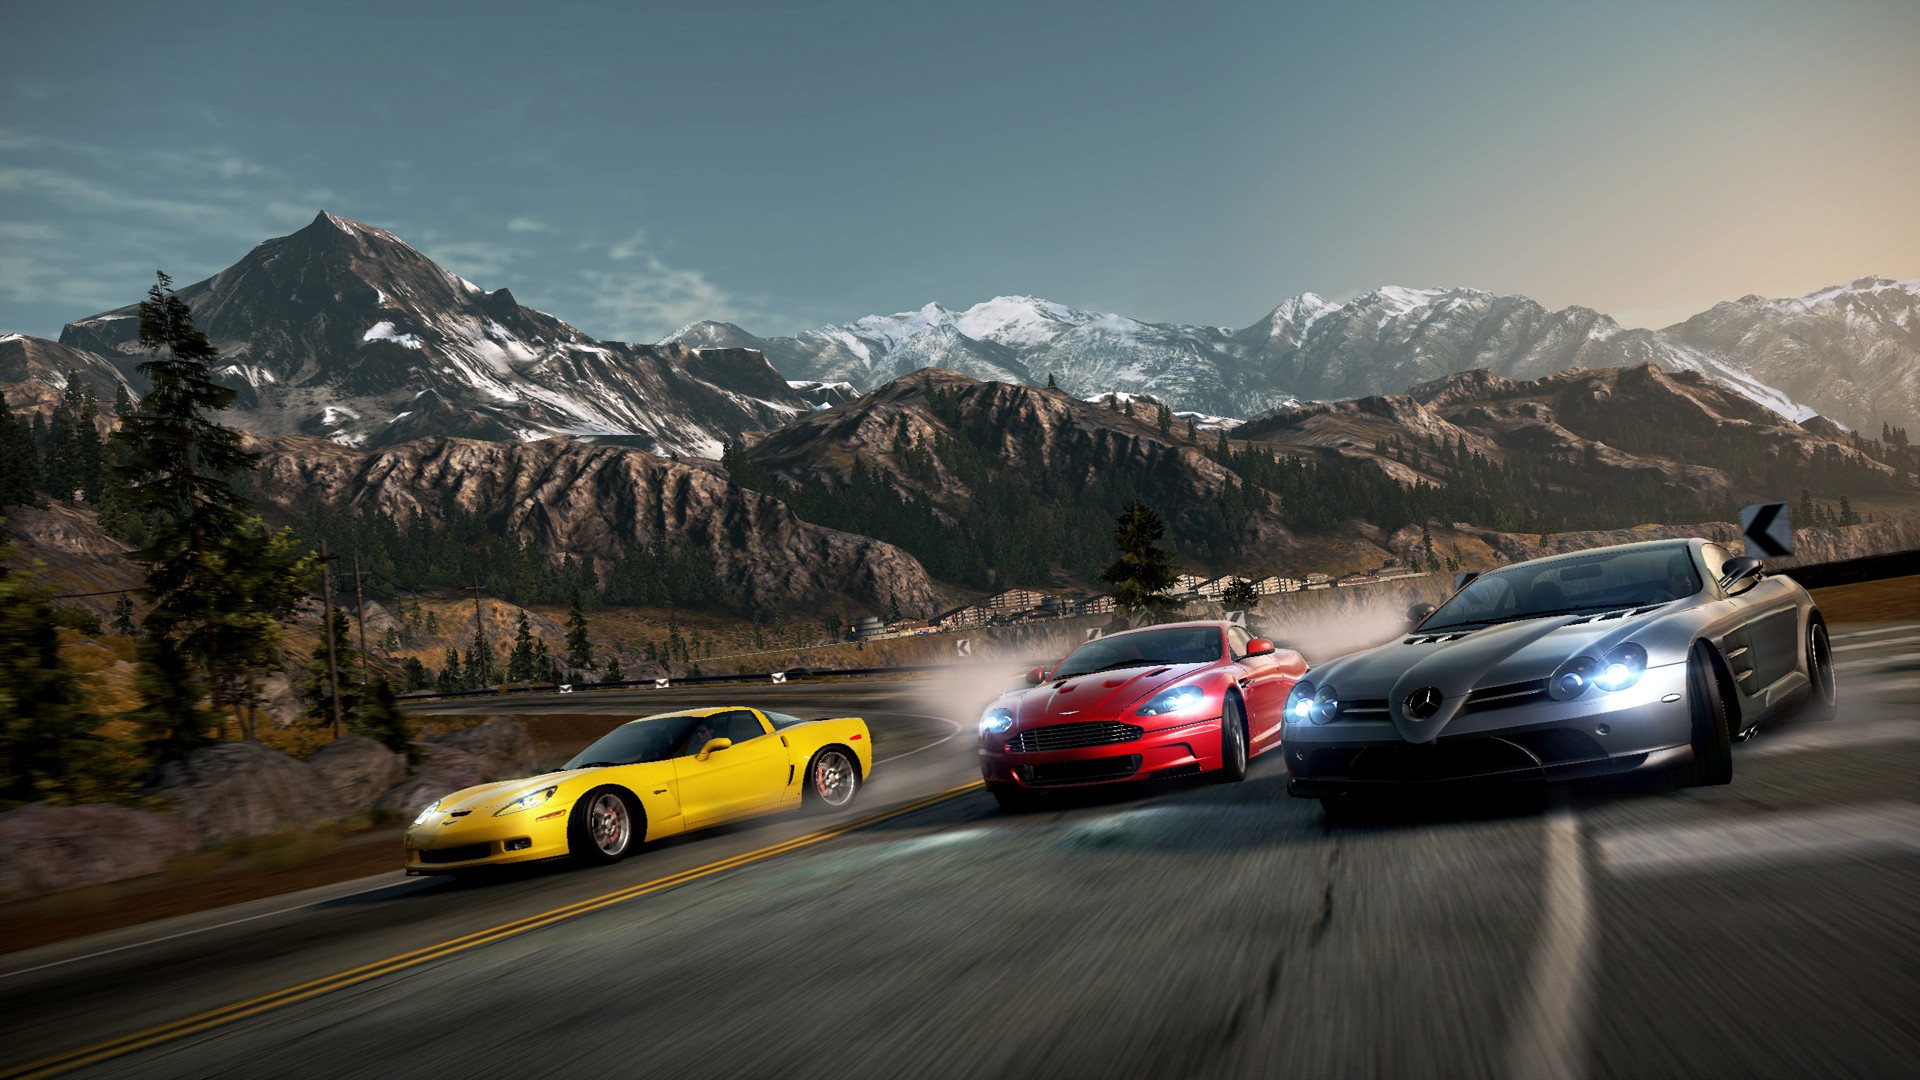 Need for Speed: Rivals by AcerSense on DeviantArt